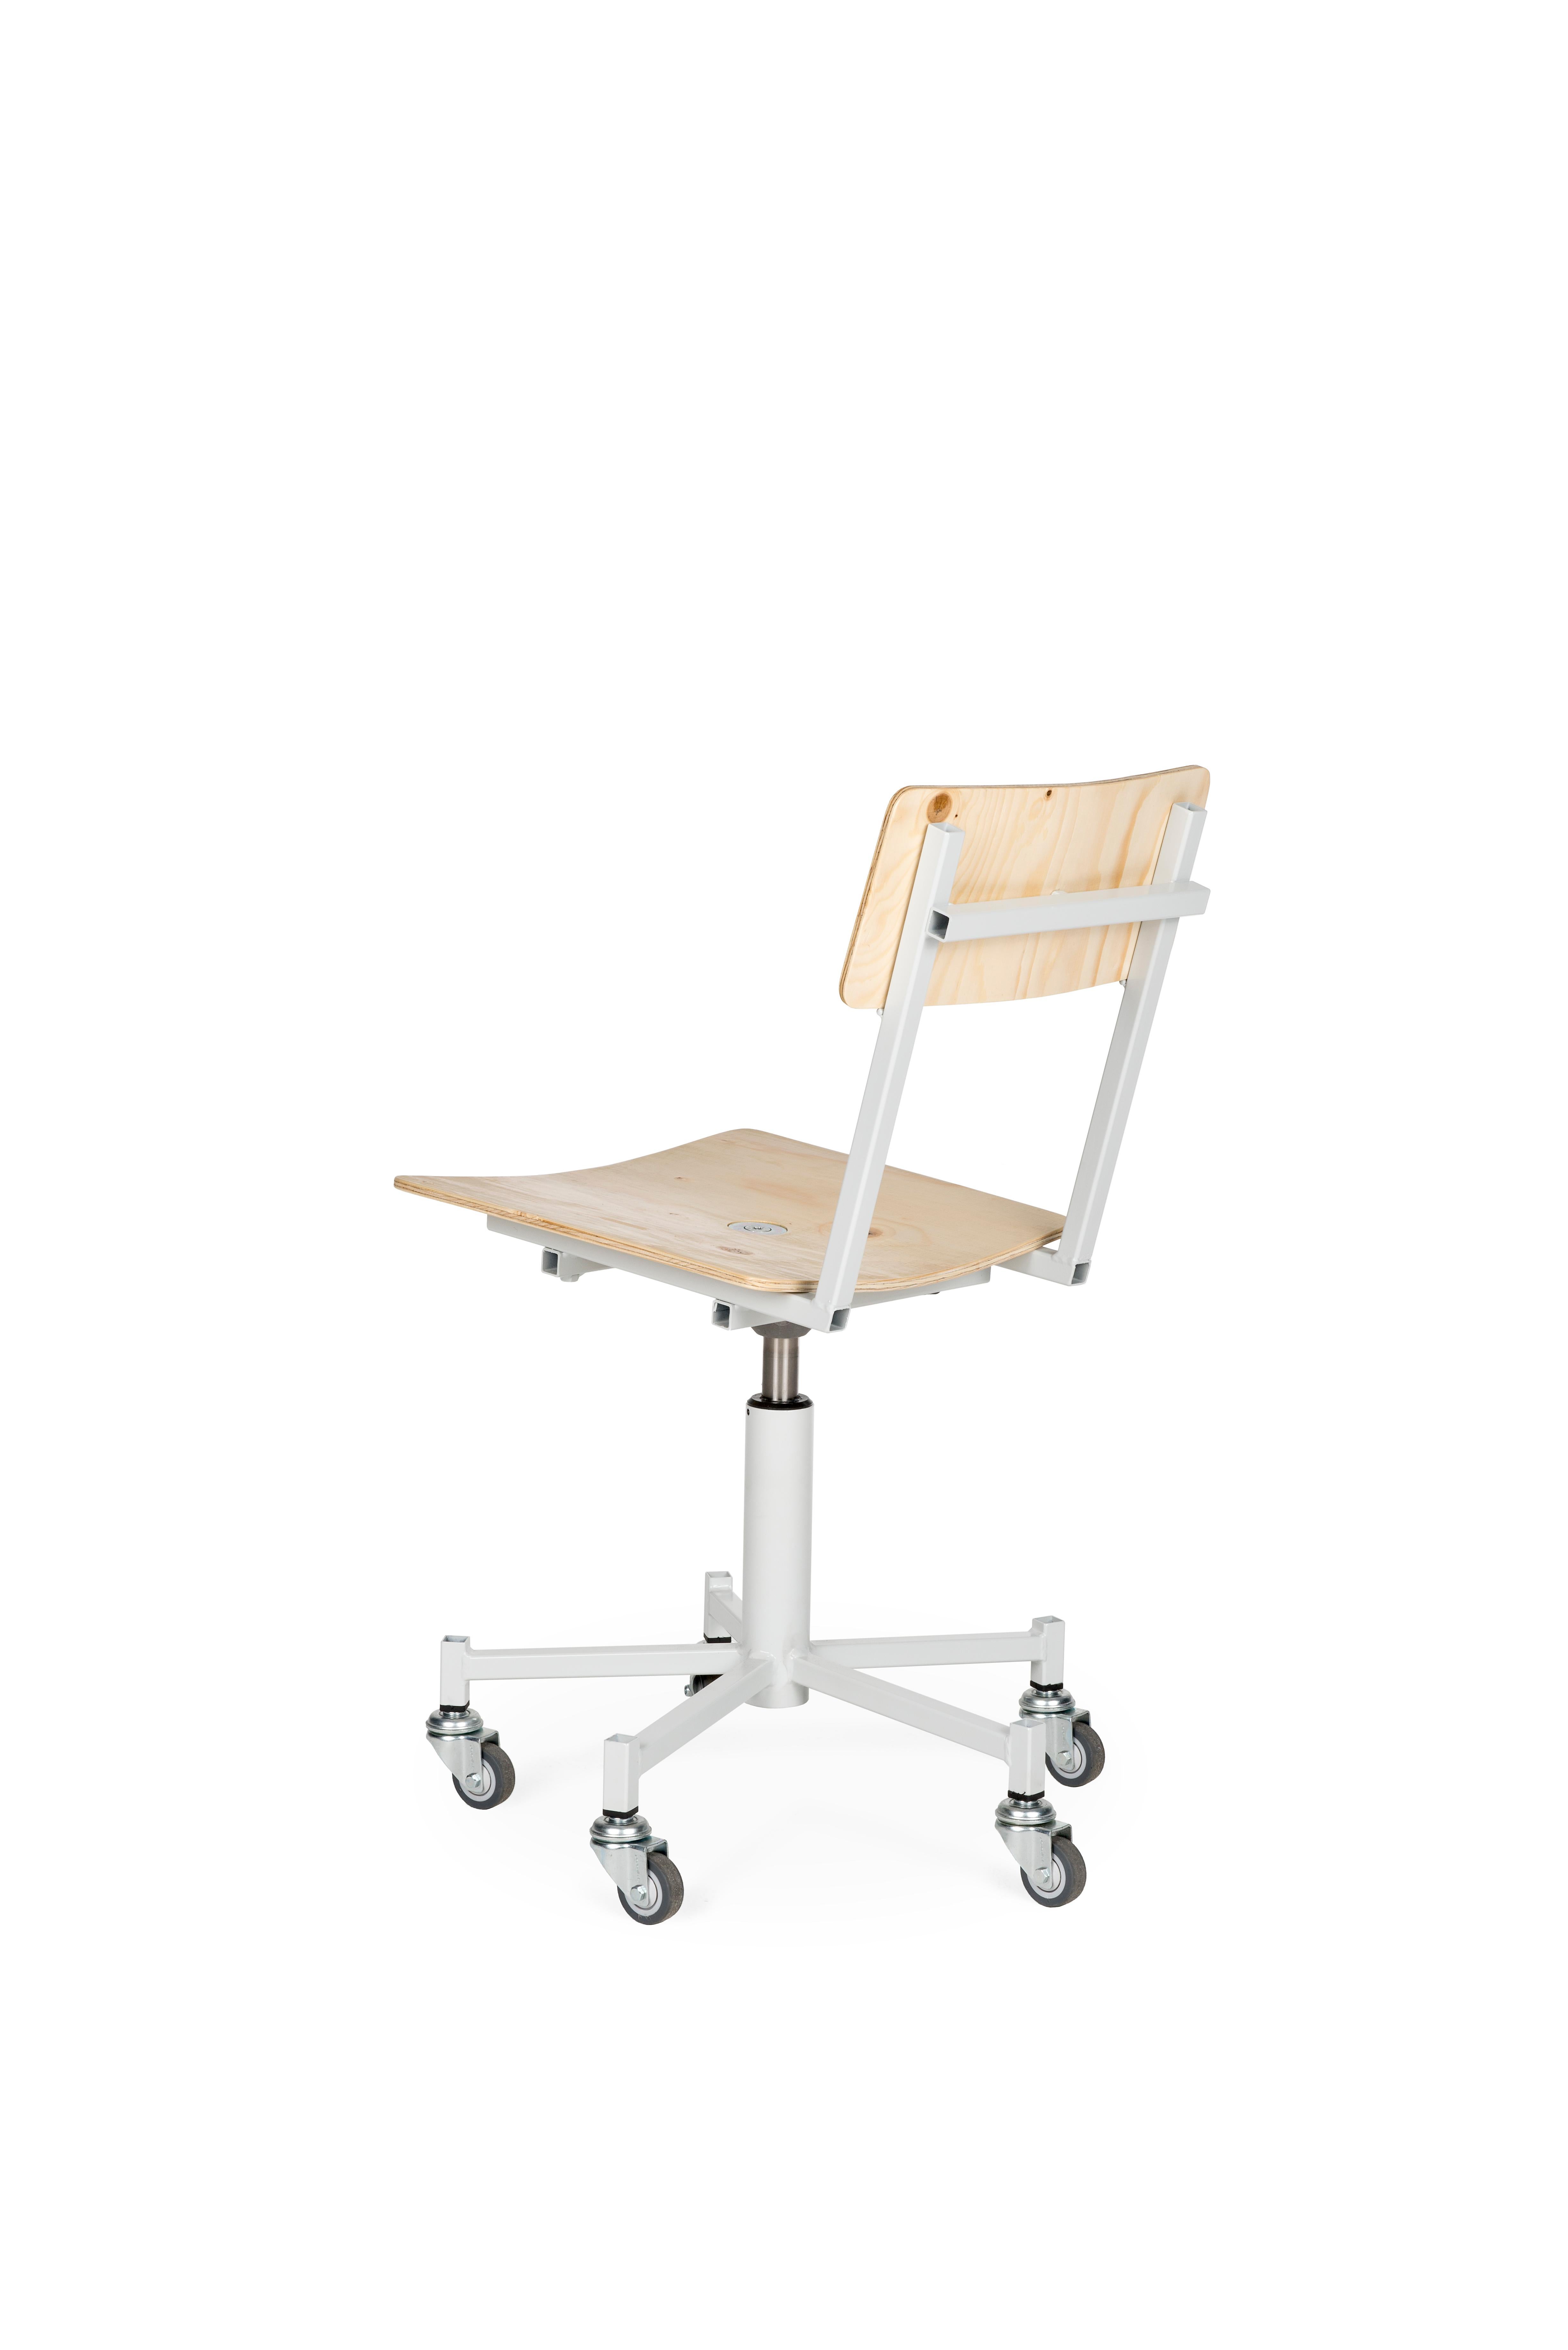 Lensvelt PHM2012 Office Chair In New Condition For Sale In Amsterdam, NL